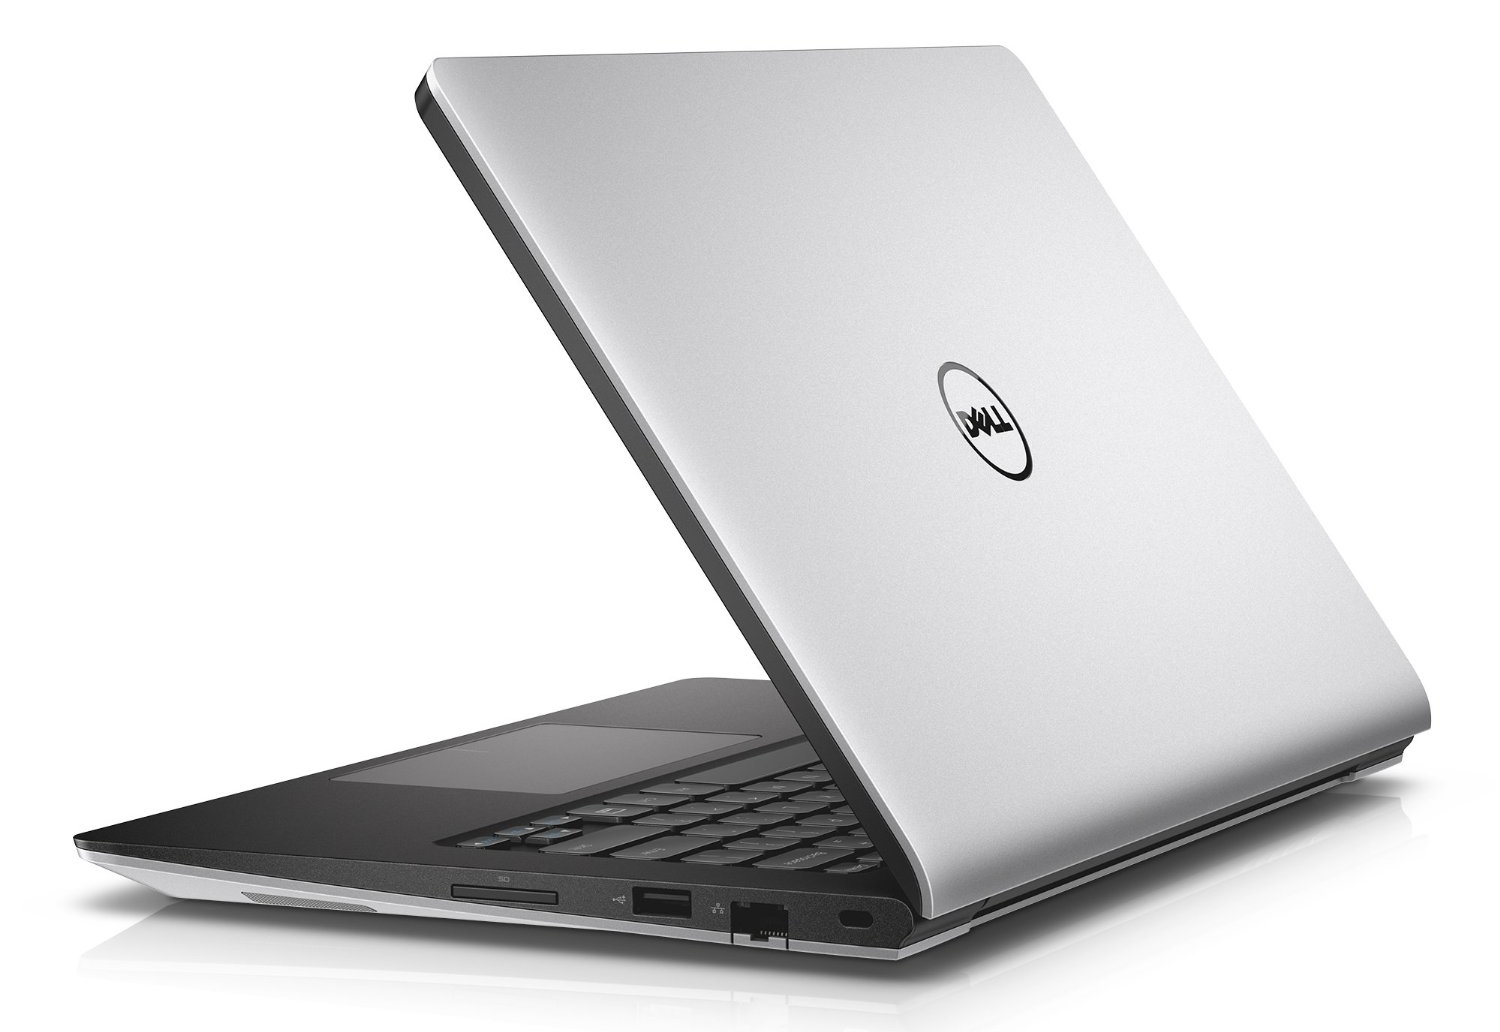 dell drivers for windows 10 64 bit download